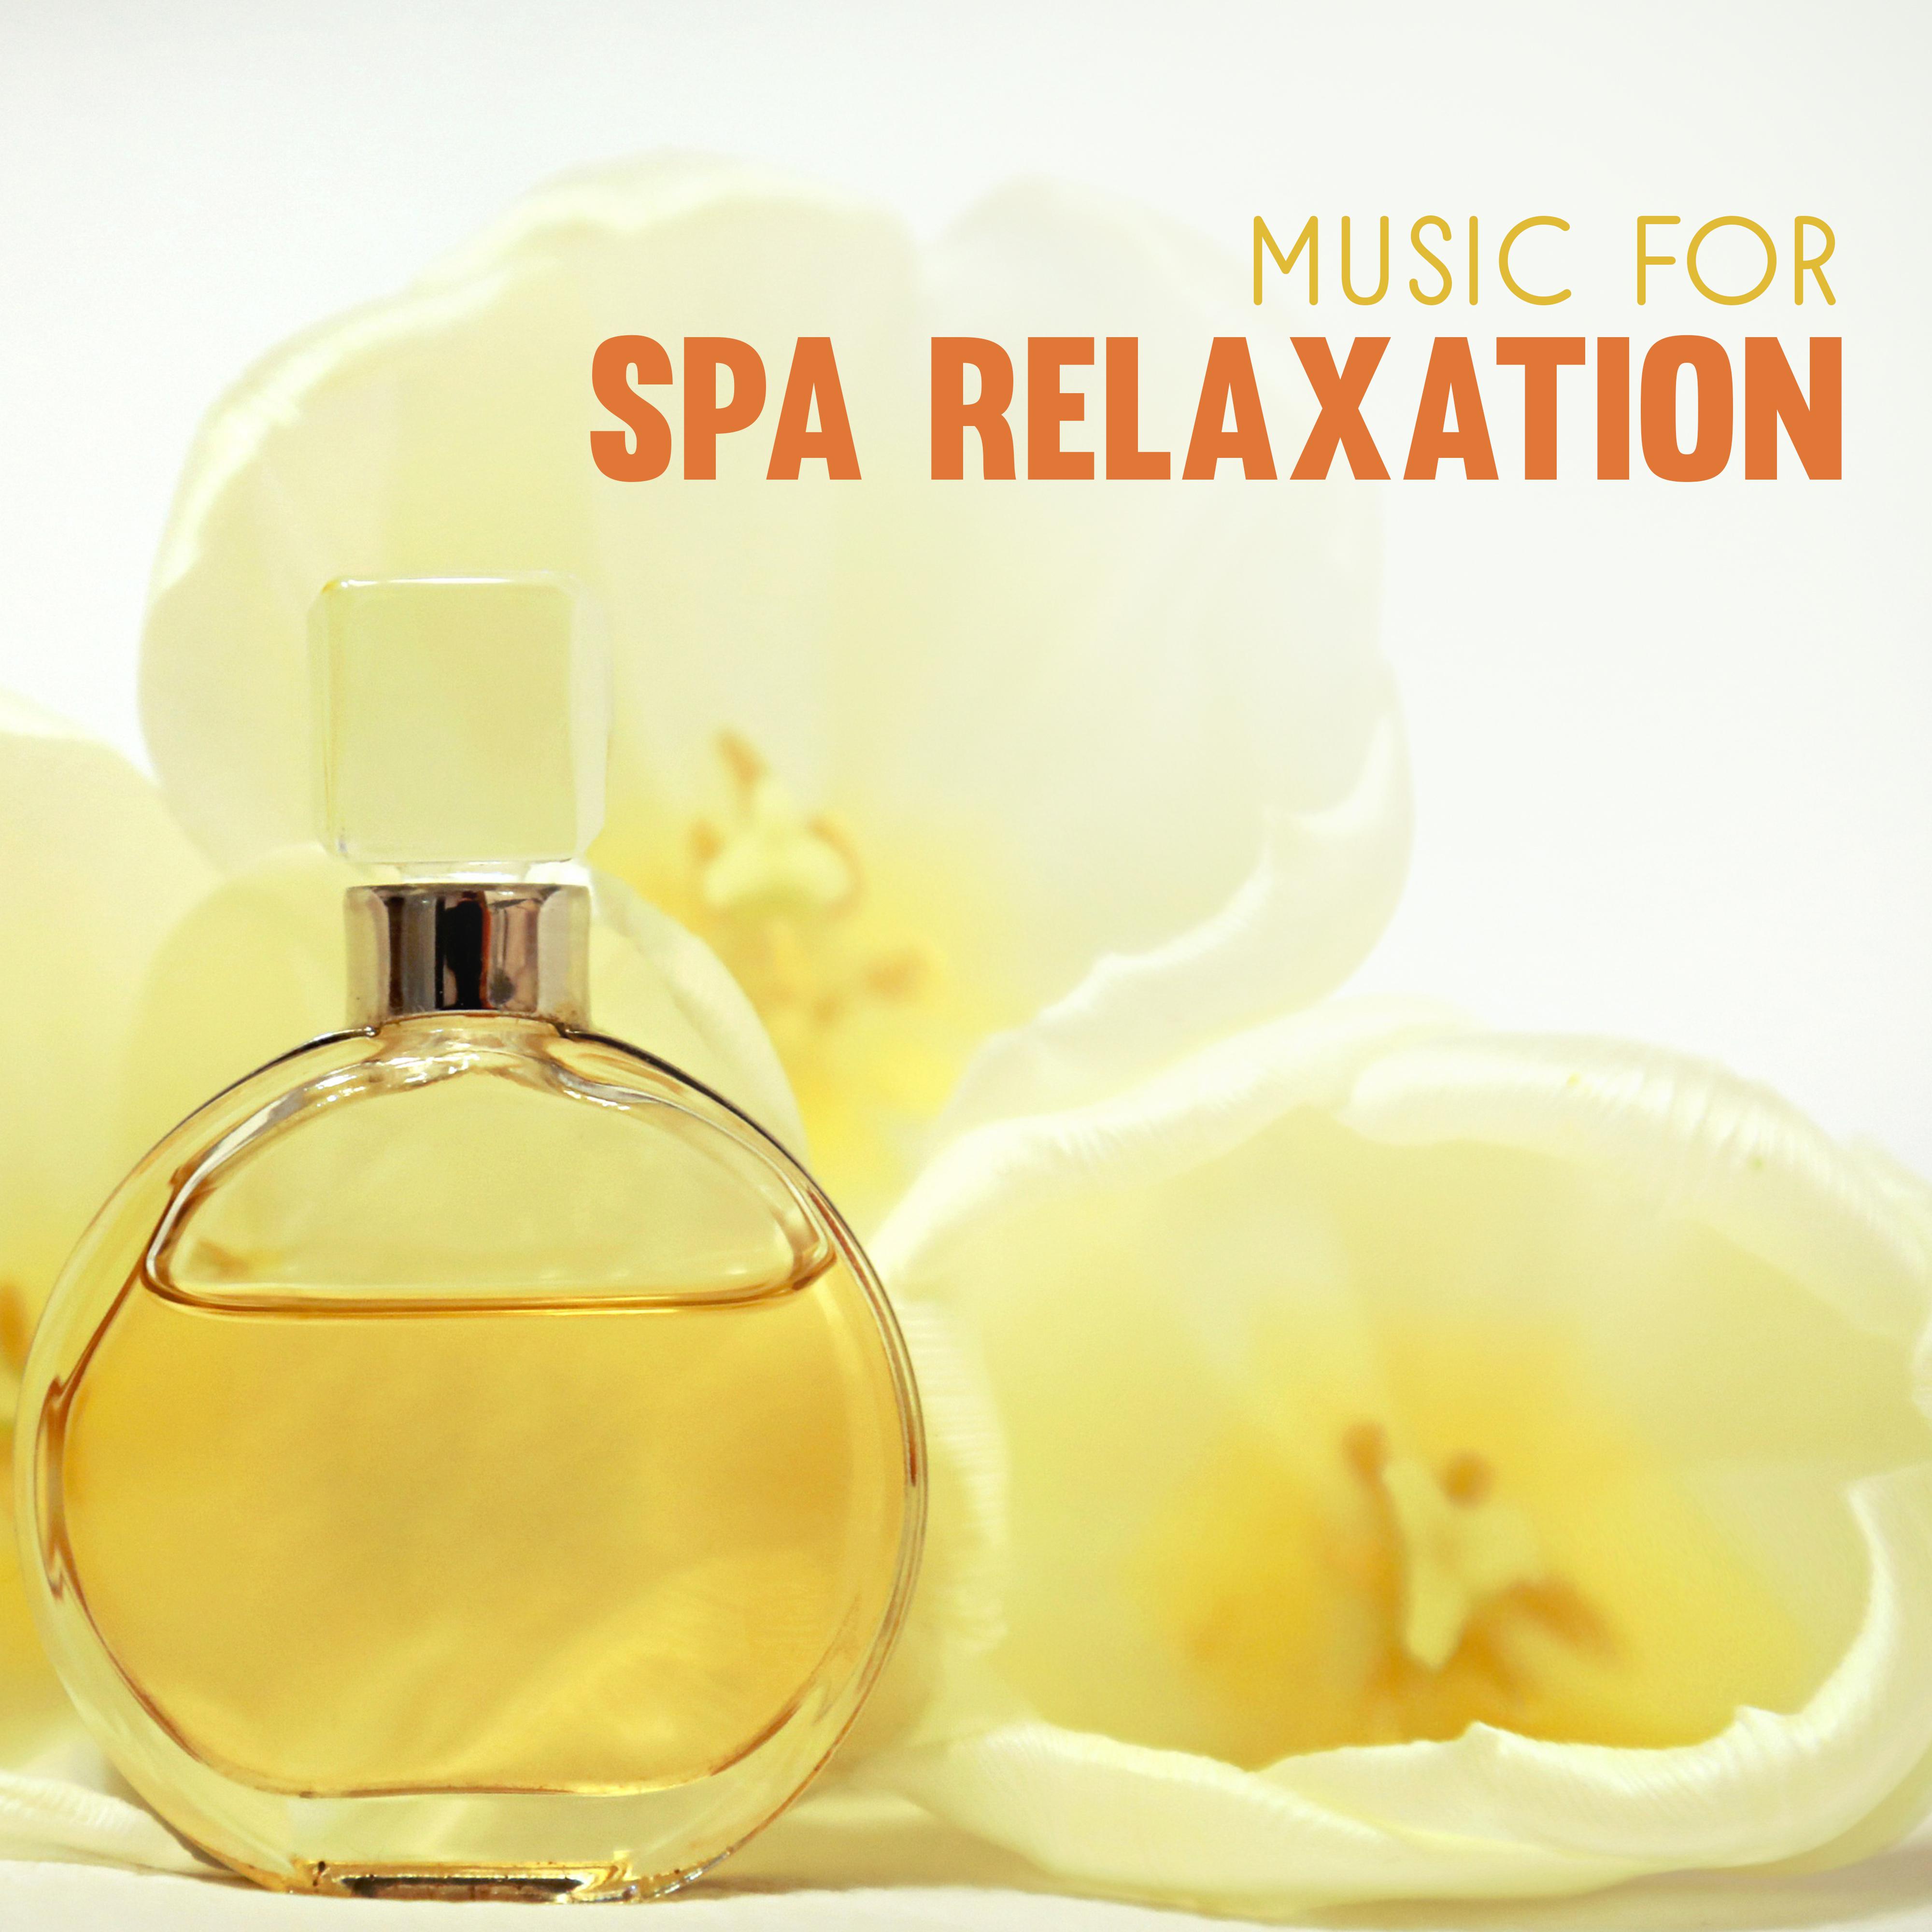 Music for Spa Relaxation  New Age Spa Music, Rest  Rleax, Easy Listening, Stress Relief, Hot Stone Massage